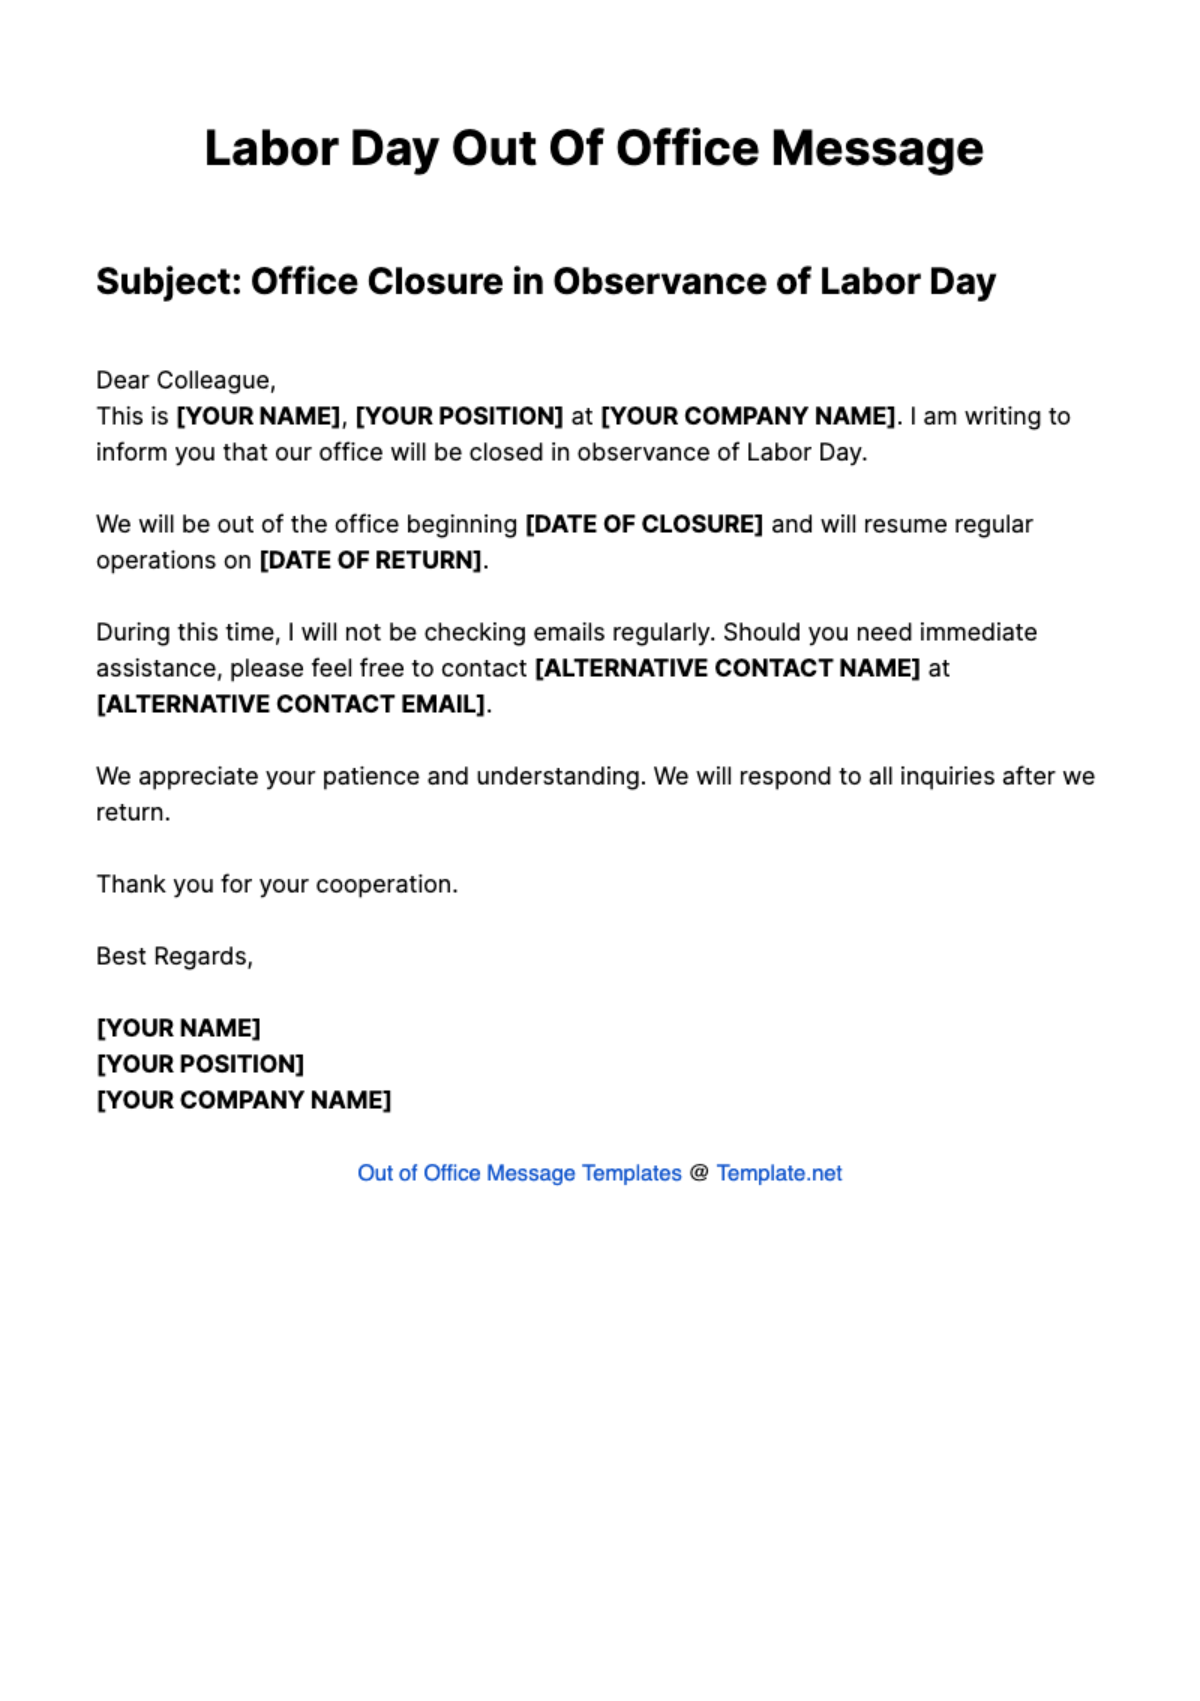 Free Labor Day Out Of Office Message Template